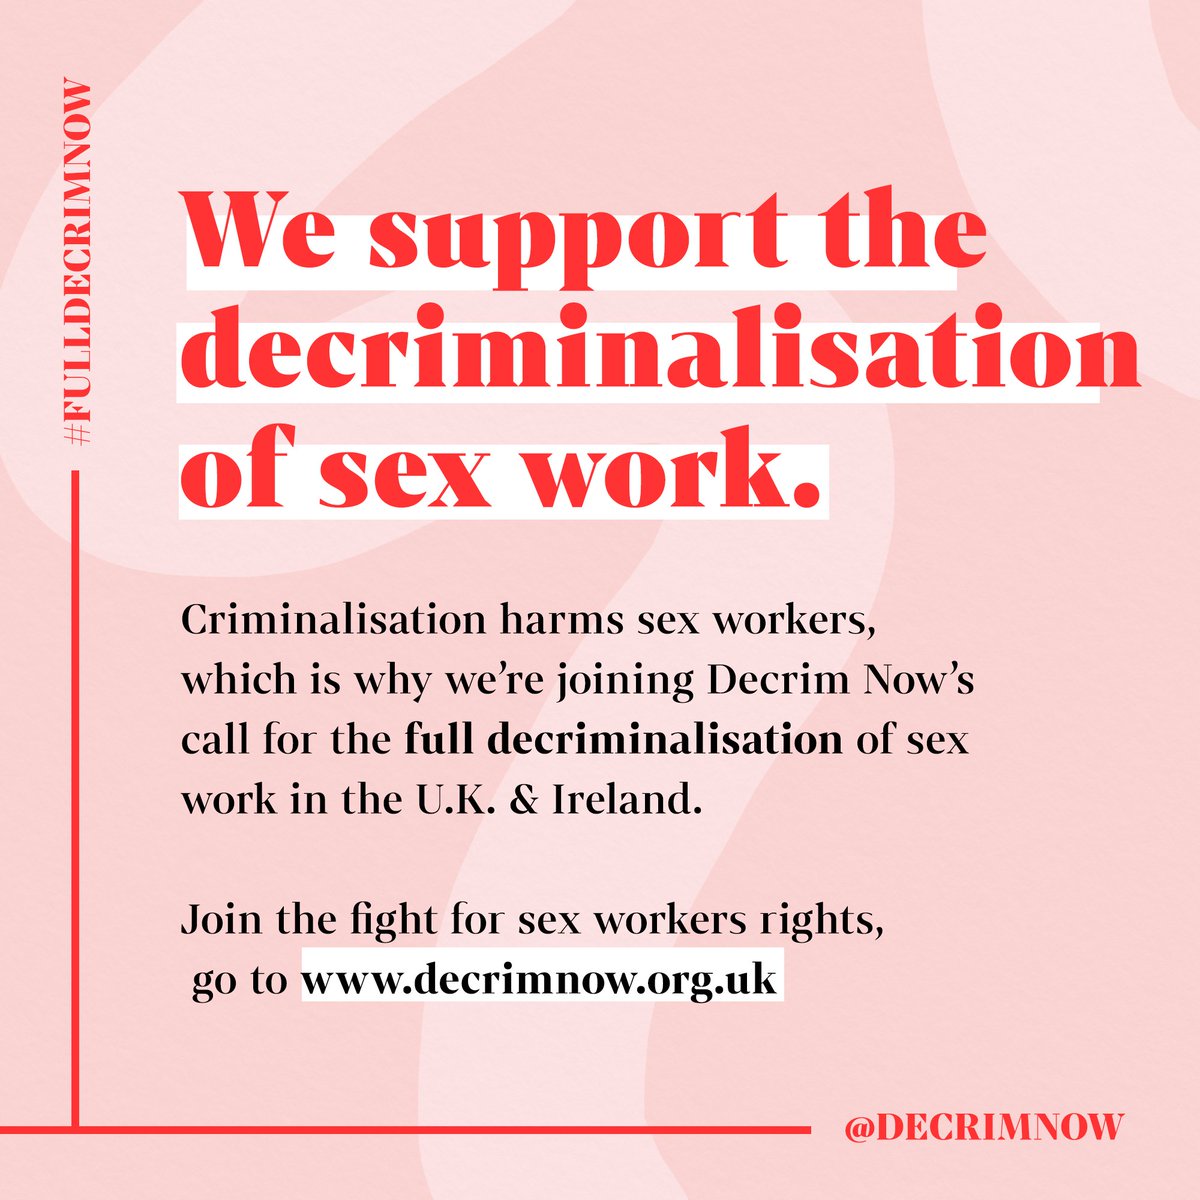 We support the call for safer conditions for sex work, advocated by @ukdecrimnow - this is a trade union issue, as is the safety of all workers.